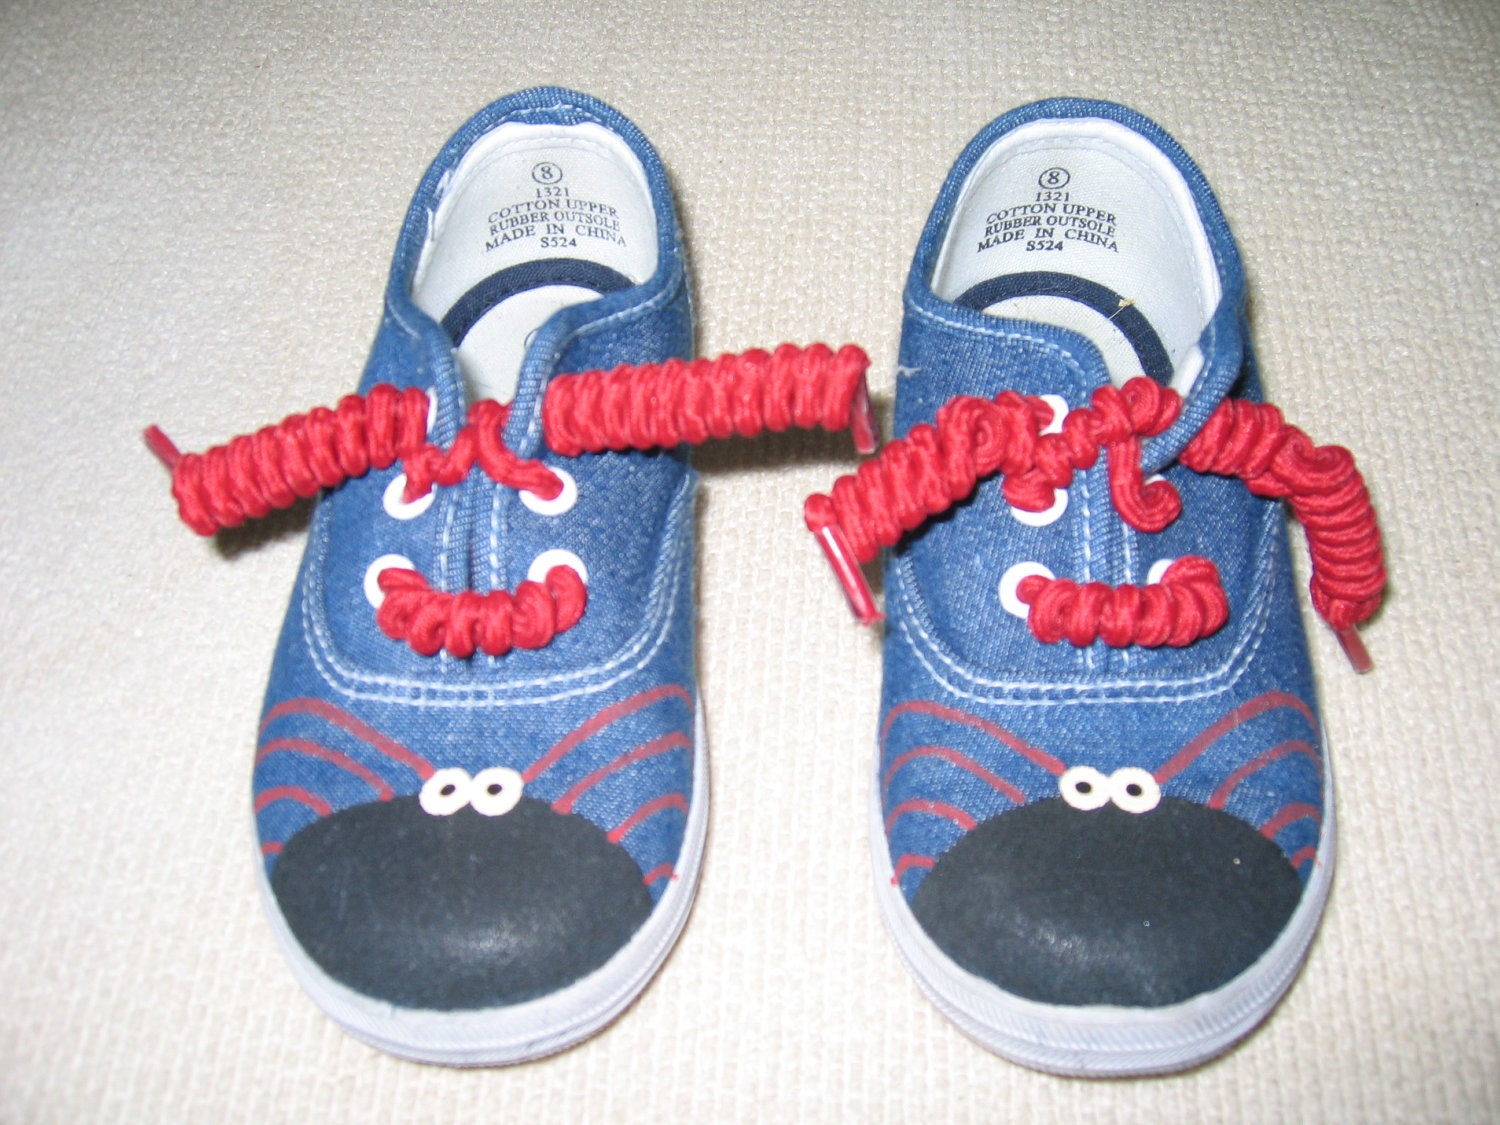 spider shoes